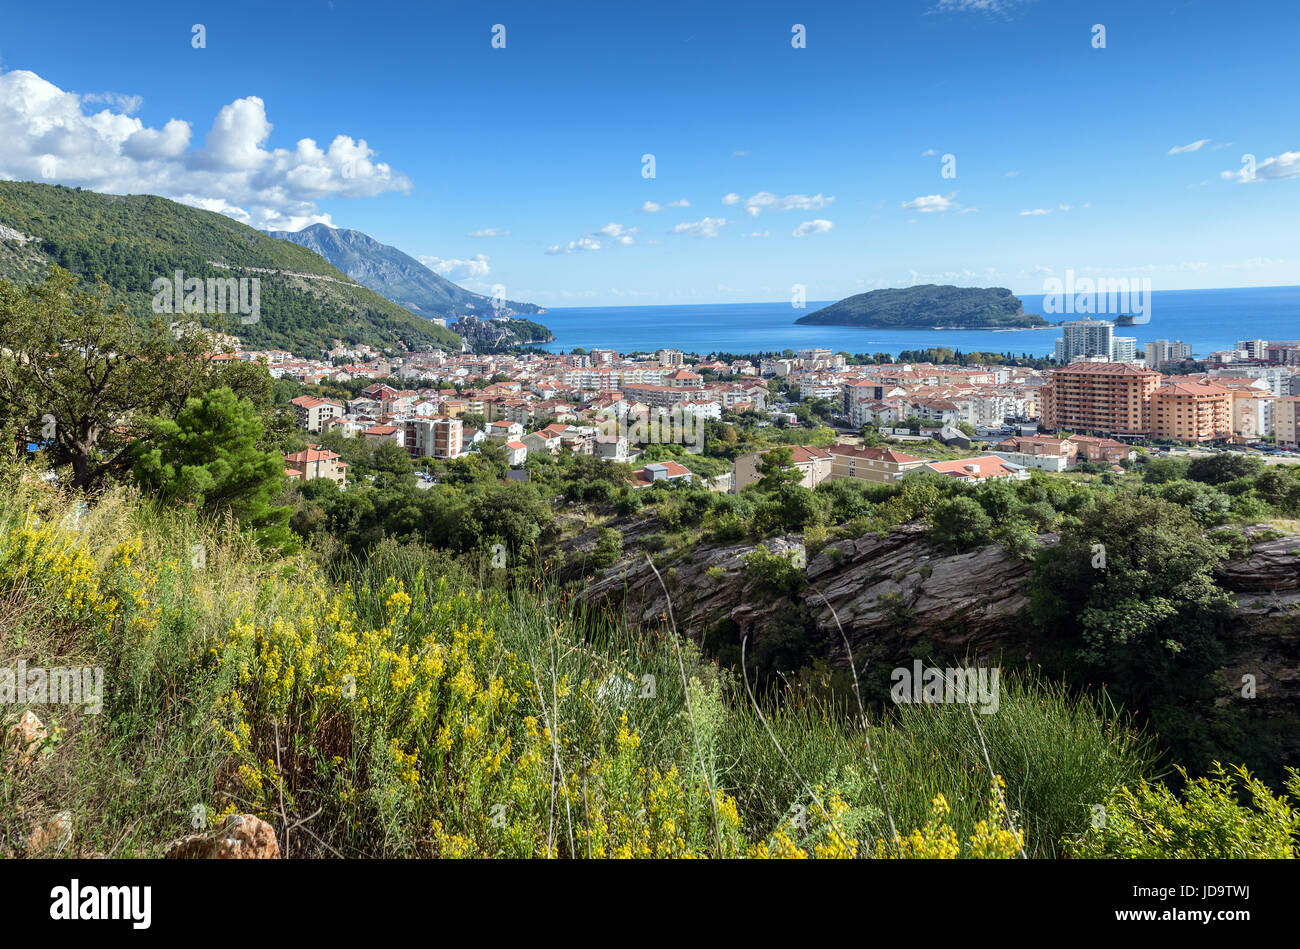 Panoramic landscape of Budva riviera. Balkans, Adriatic sea, Europe. View from the top of the mountain Stock Photo